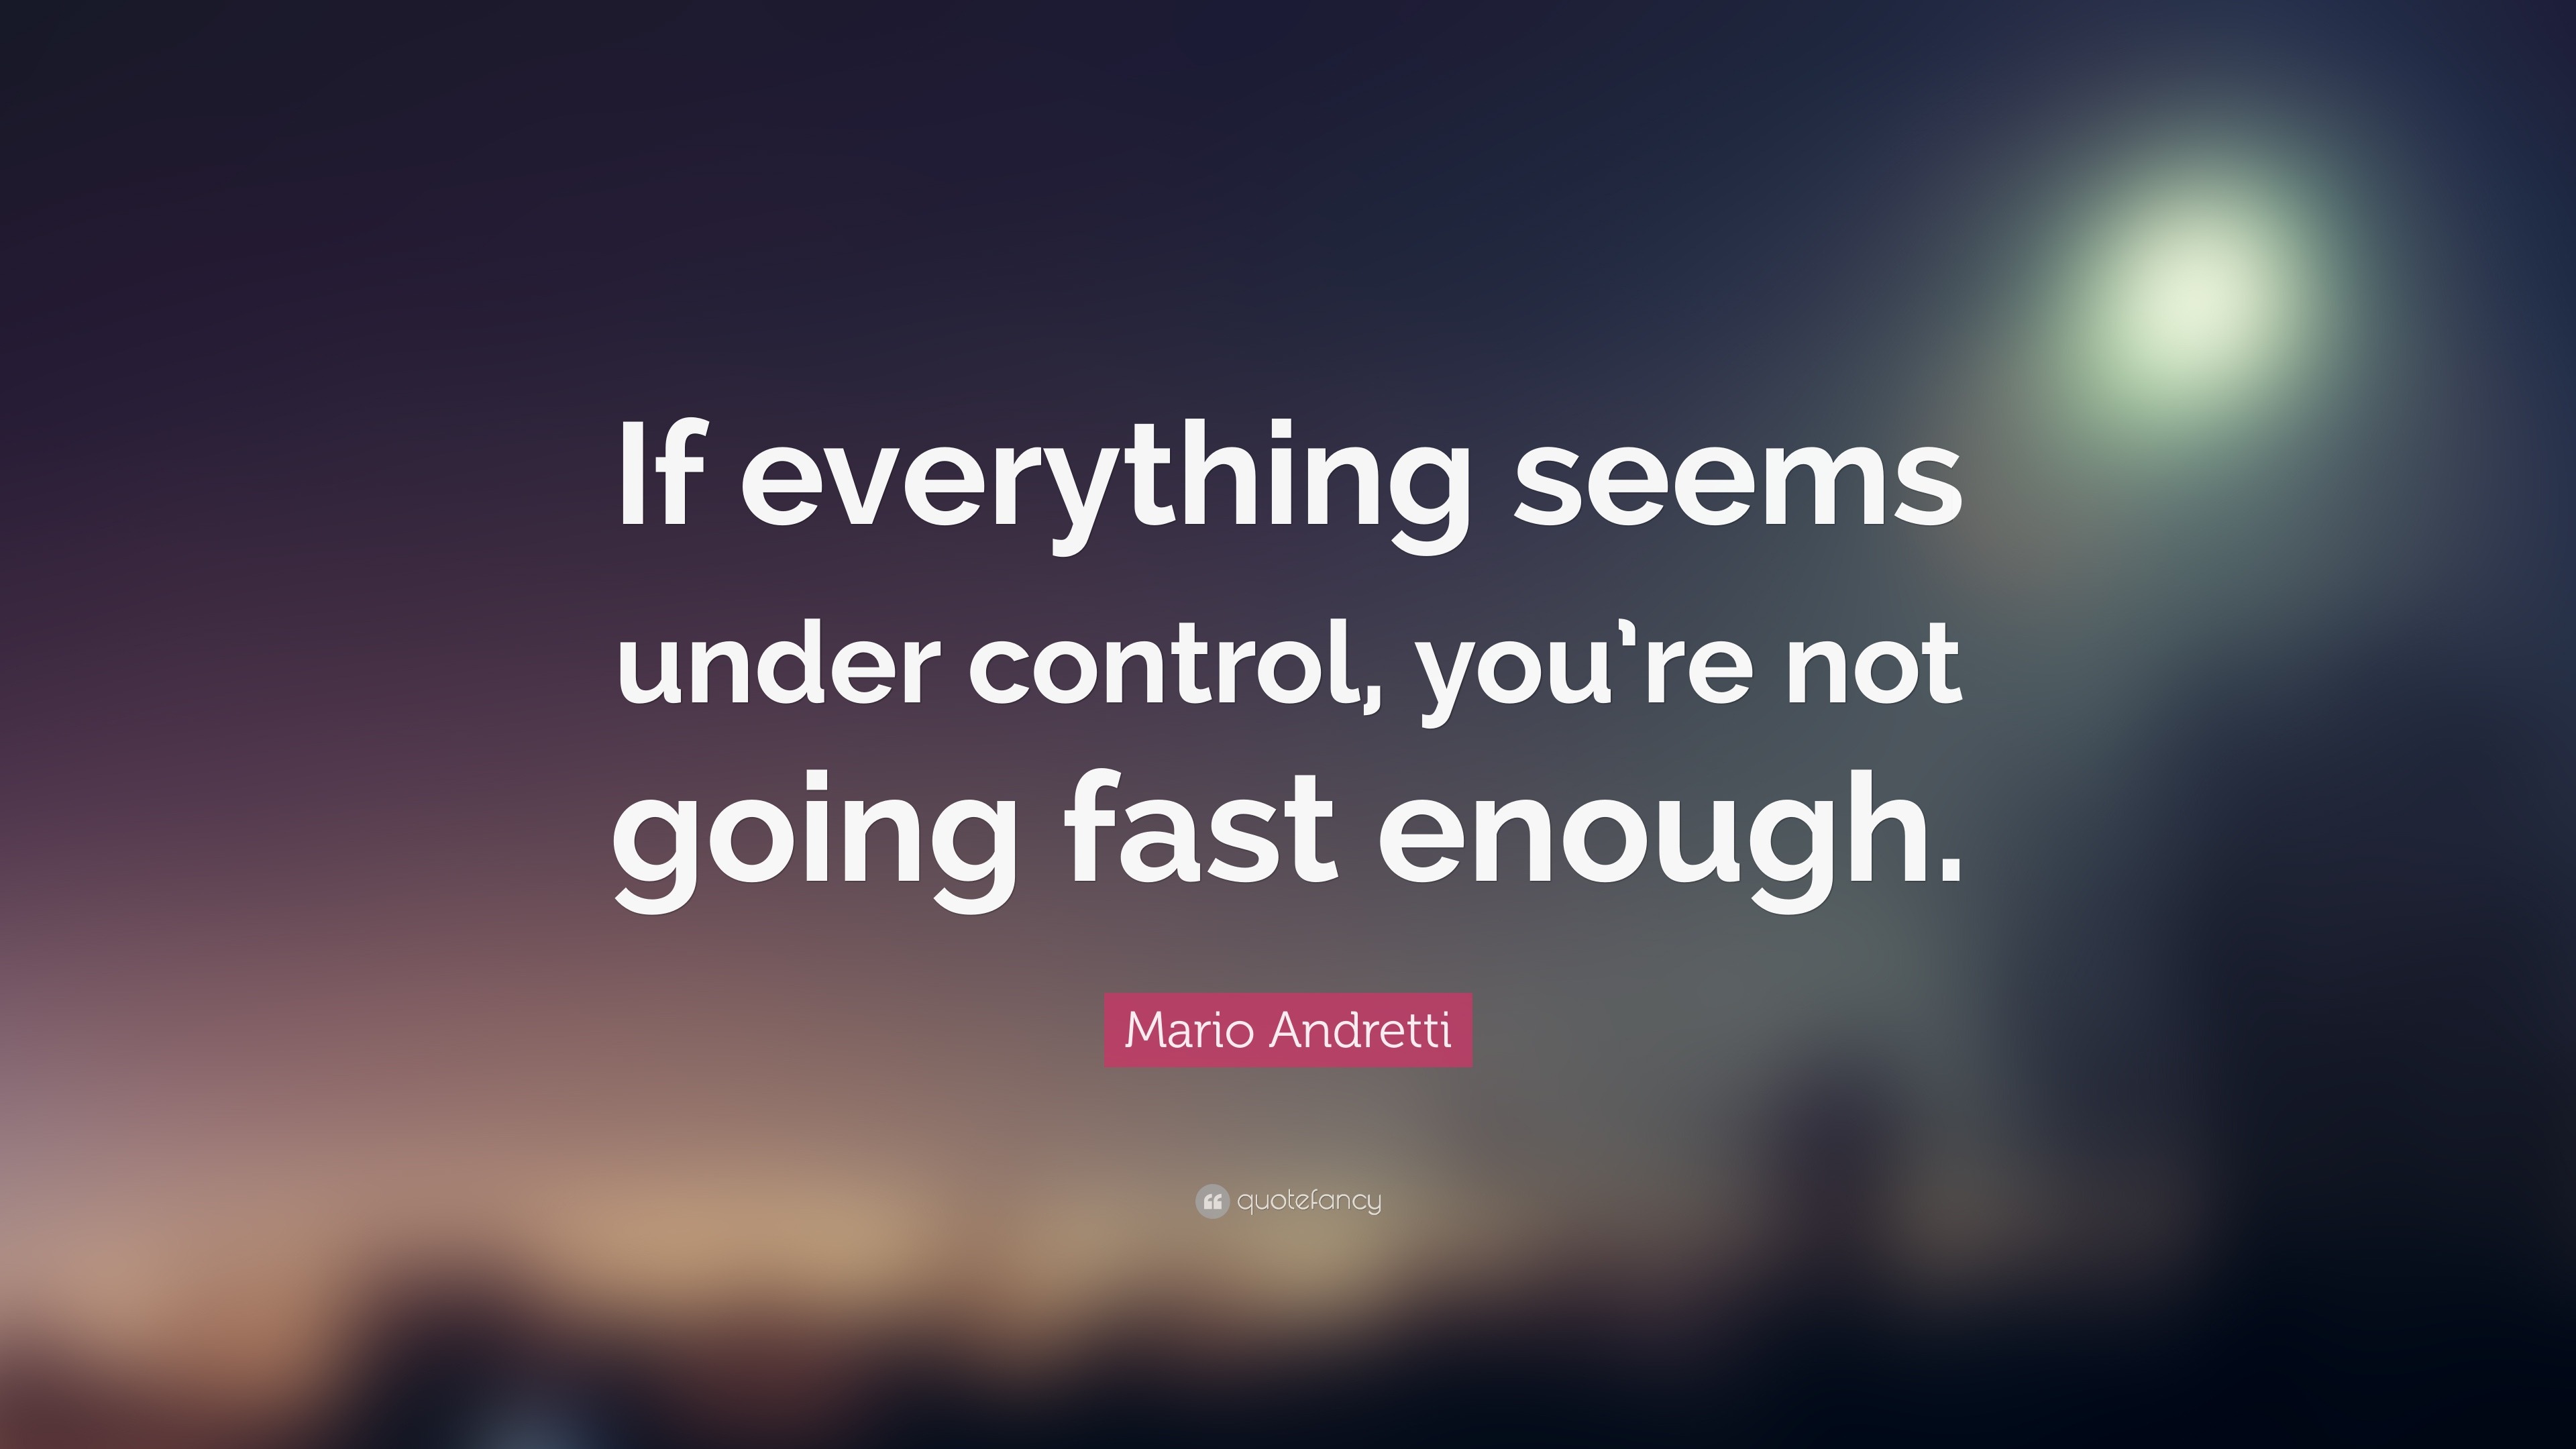 If you have everything under control, you're not moving fast